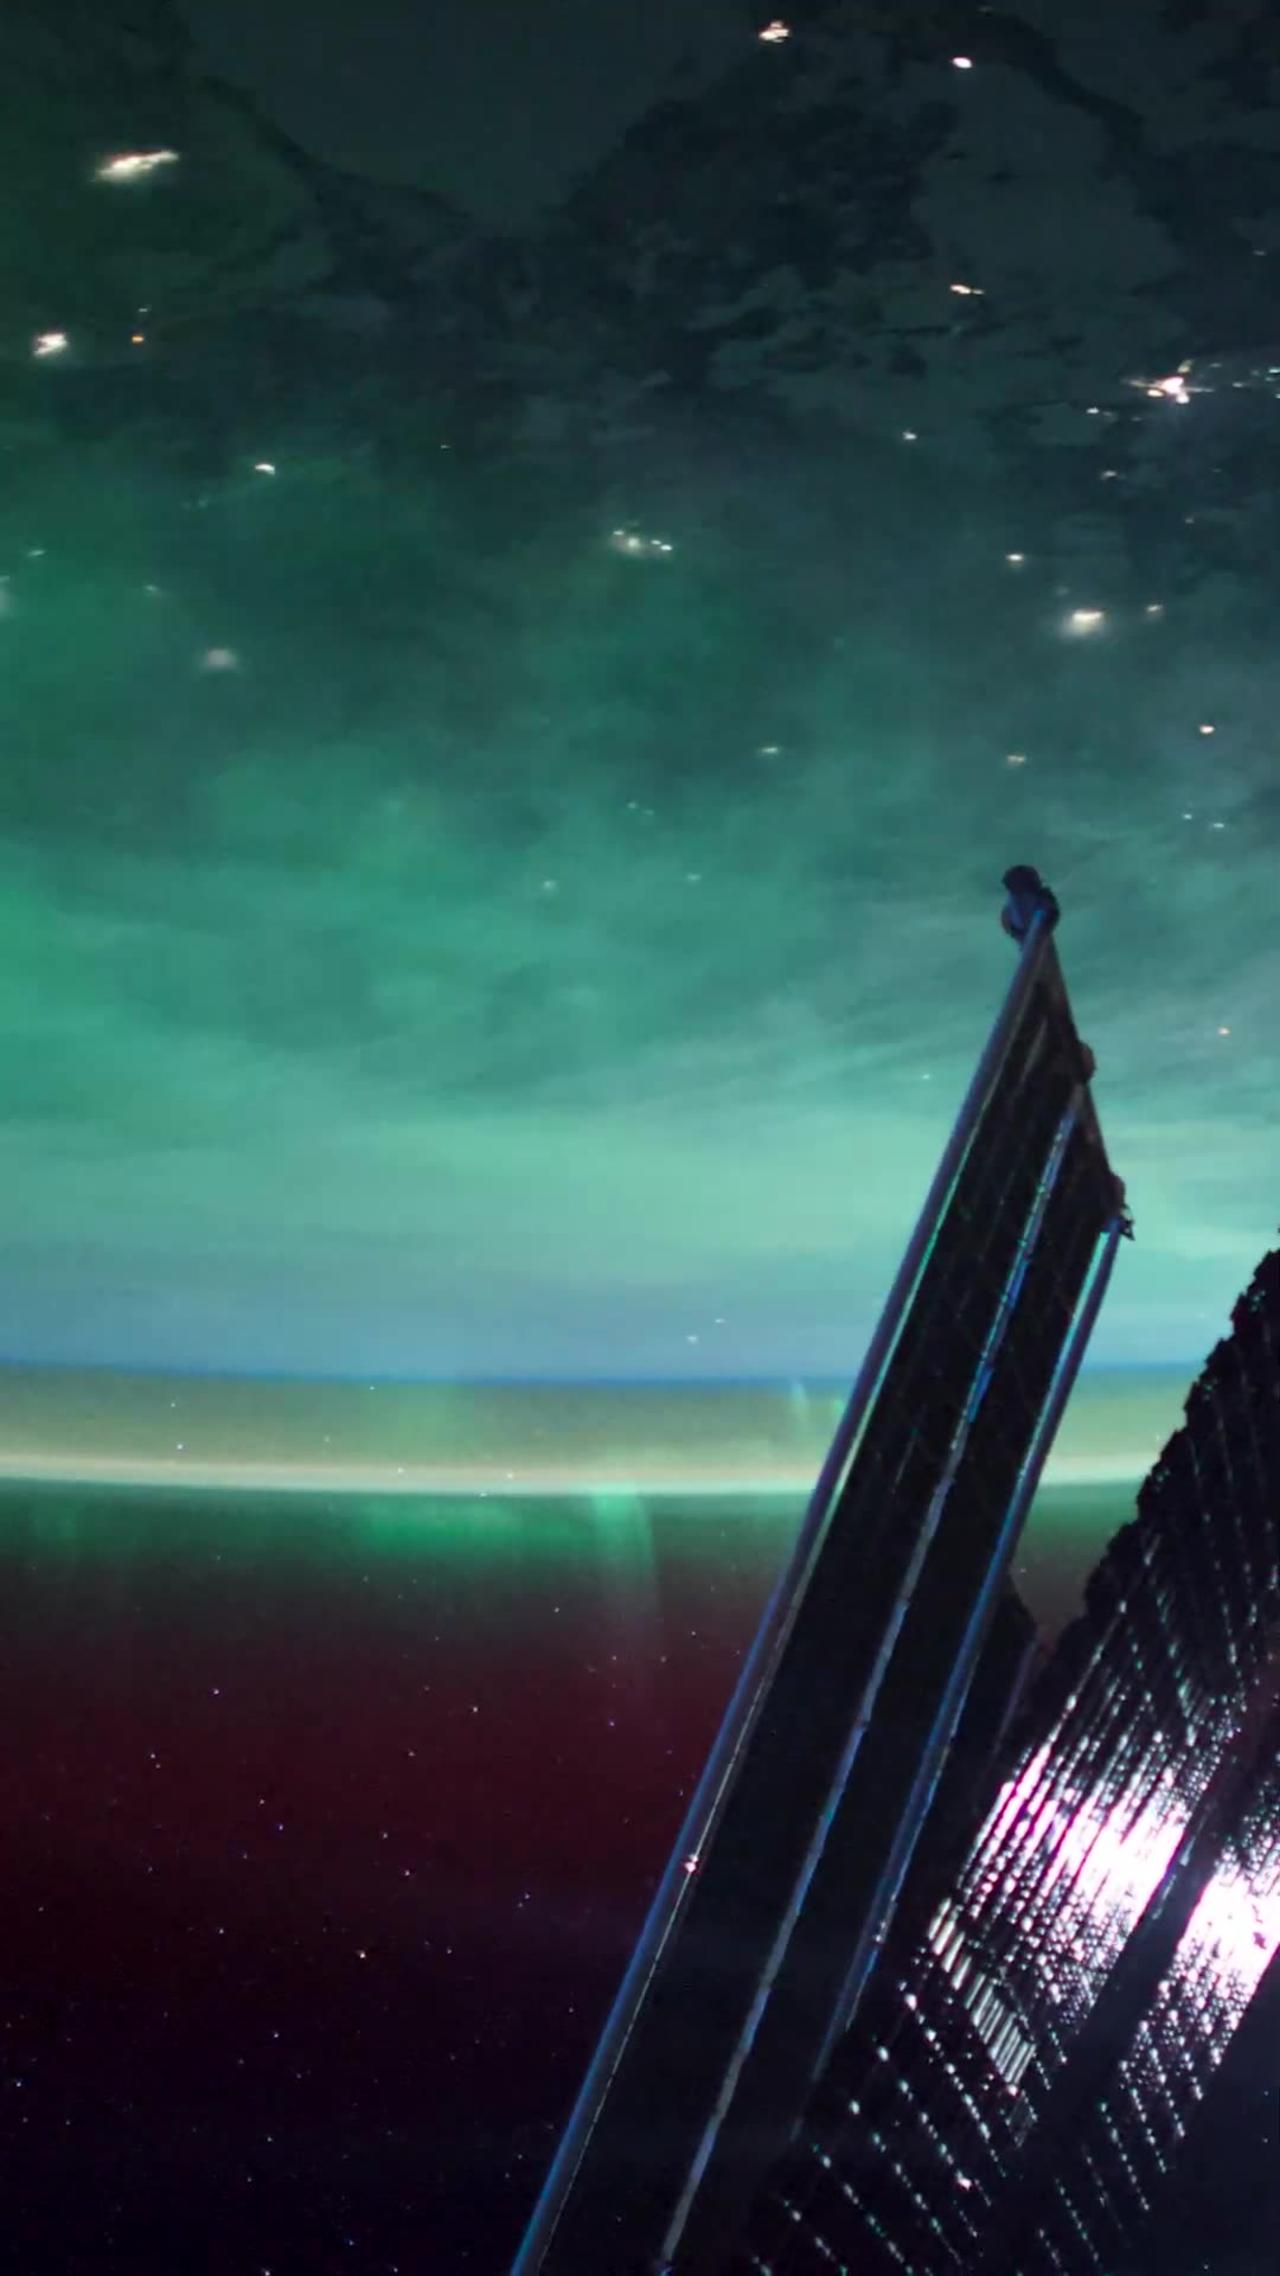 Northern lights seen from the international space center  video upload